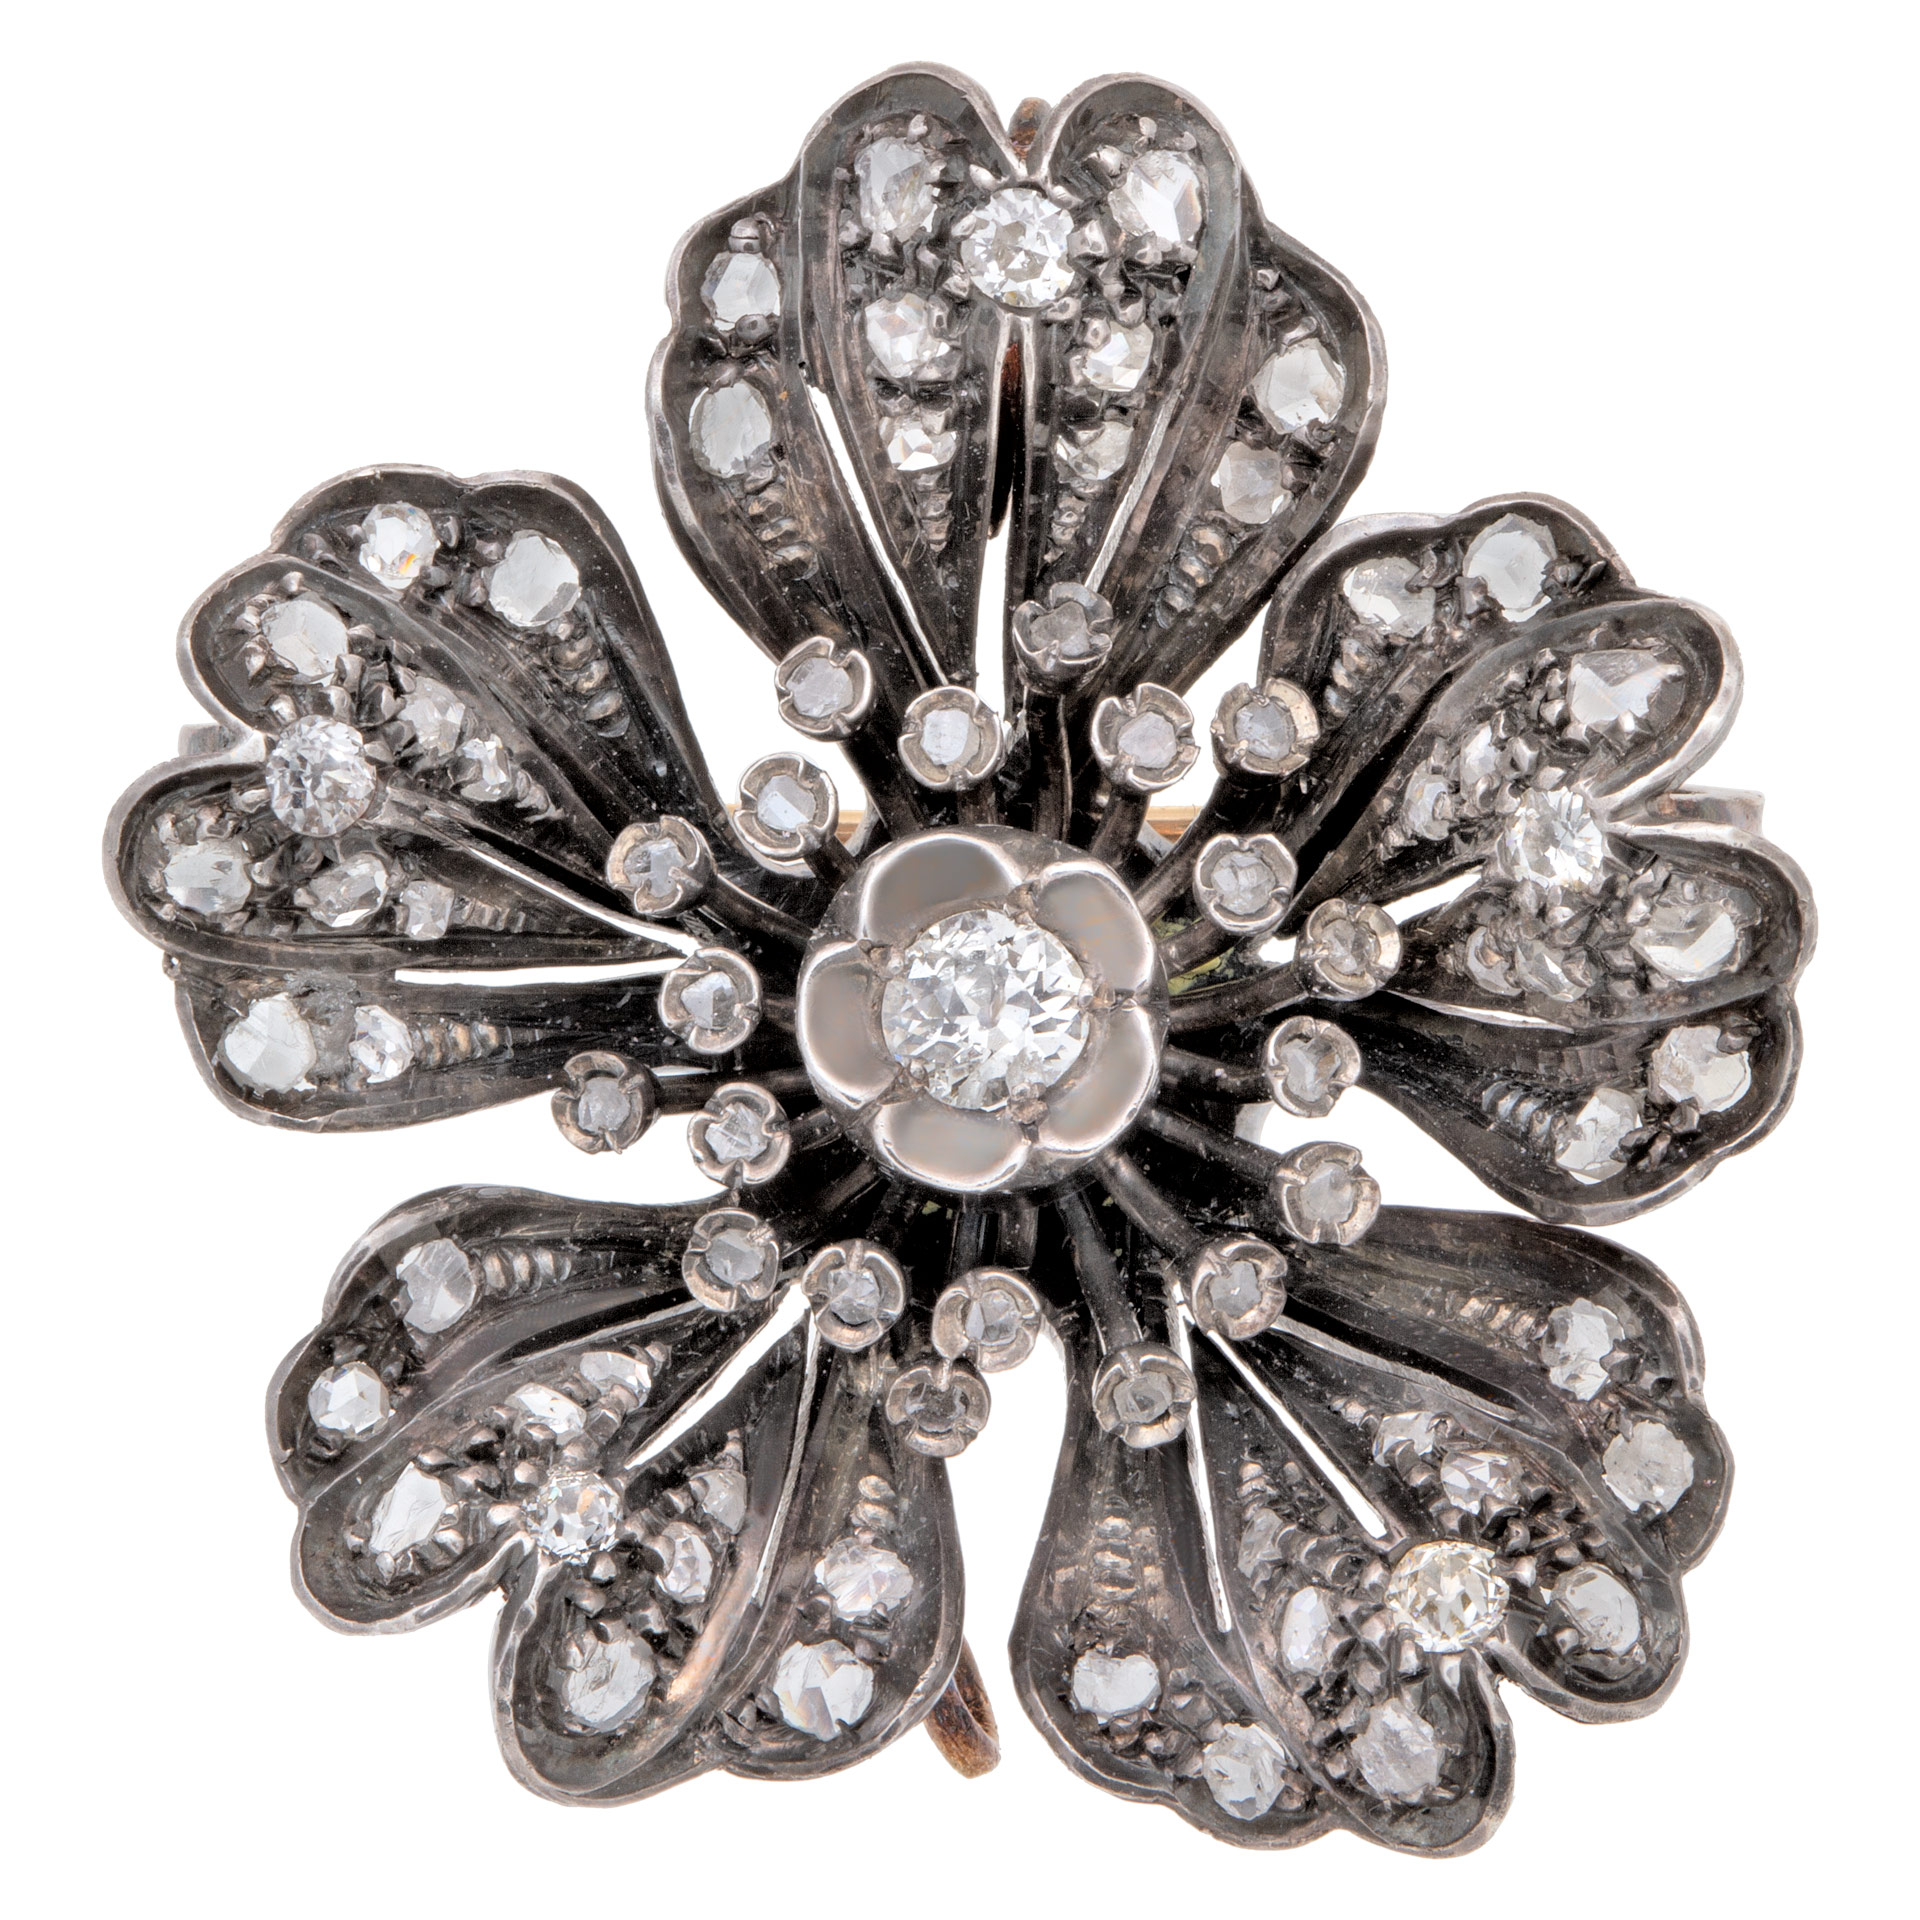 VIcorian brooch, pendant with approx. 2.00 carats old mine cut diamonds, set in sliver top and gold.